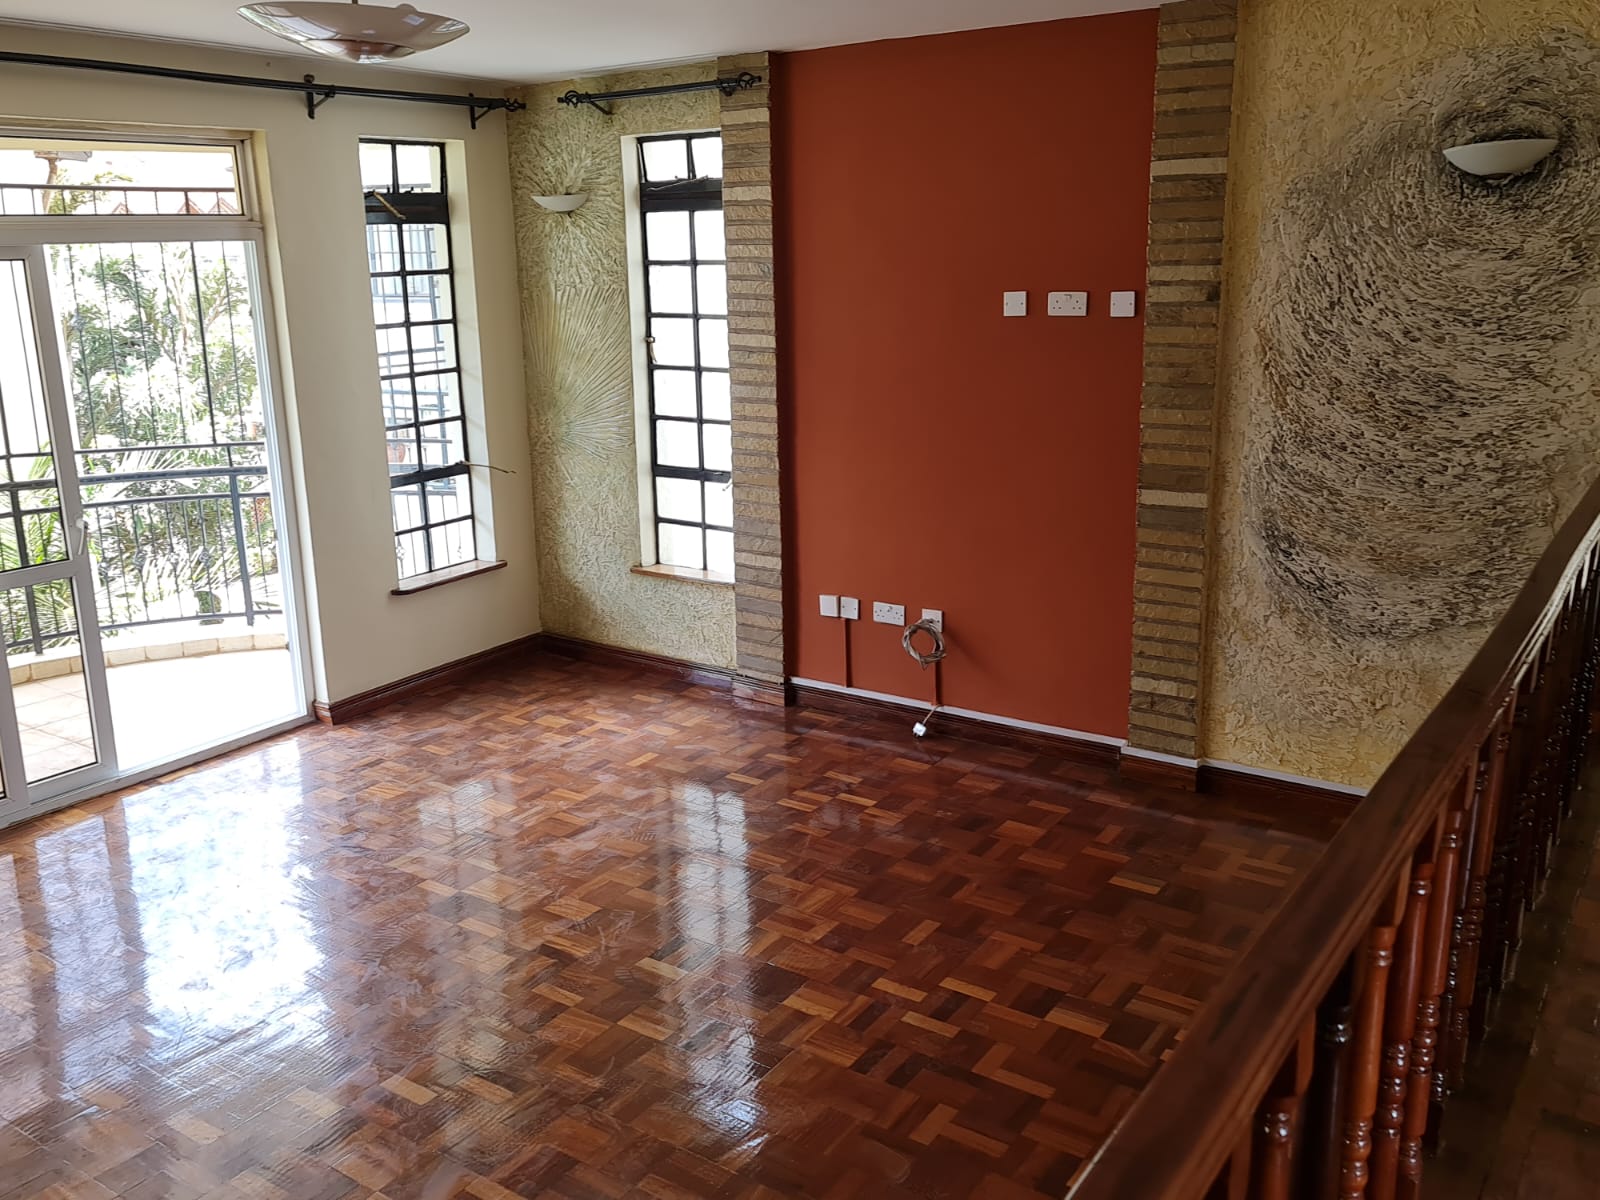 3 Bedroom Apartment Plus DSQ Unfurnished in Lavington with Beautiful Garden and exciting amenities for Rent at Ksh95k Per Month (3)